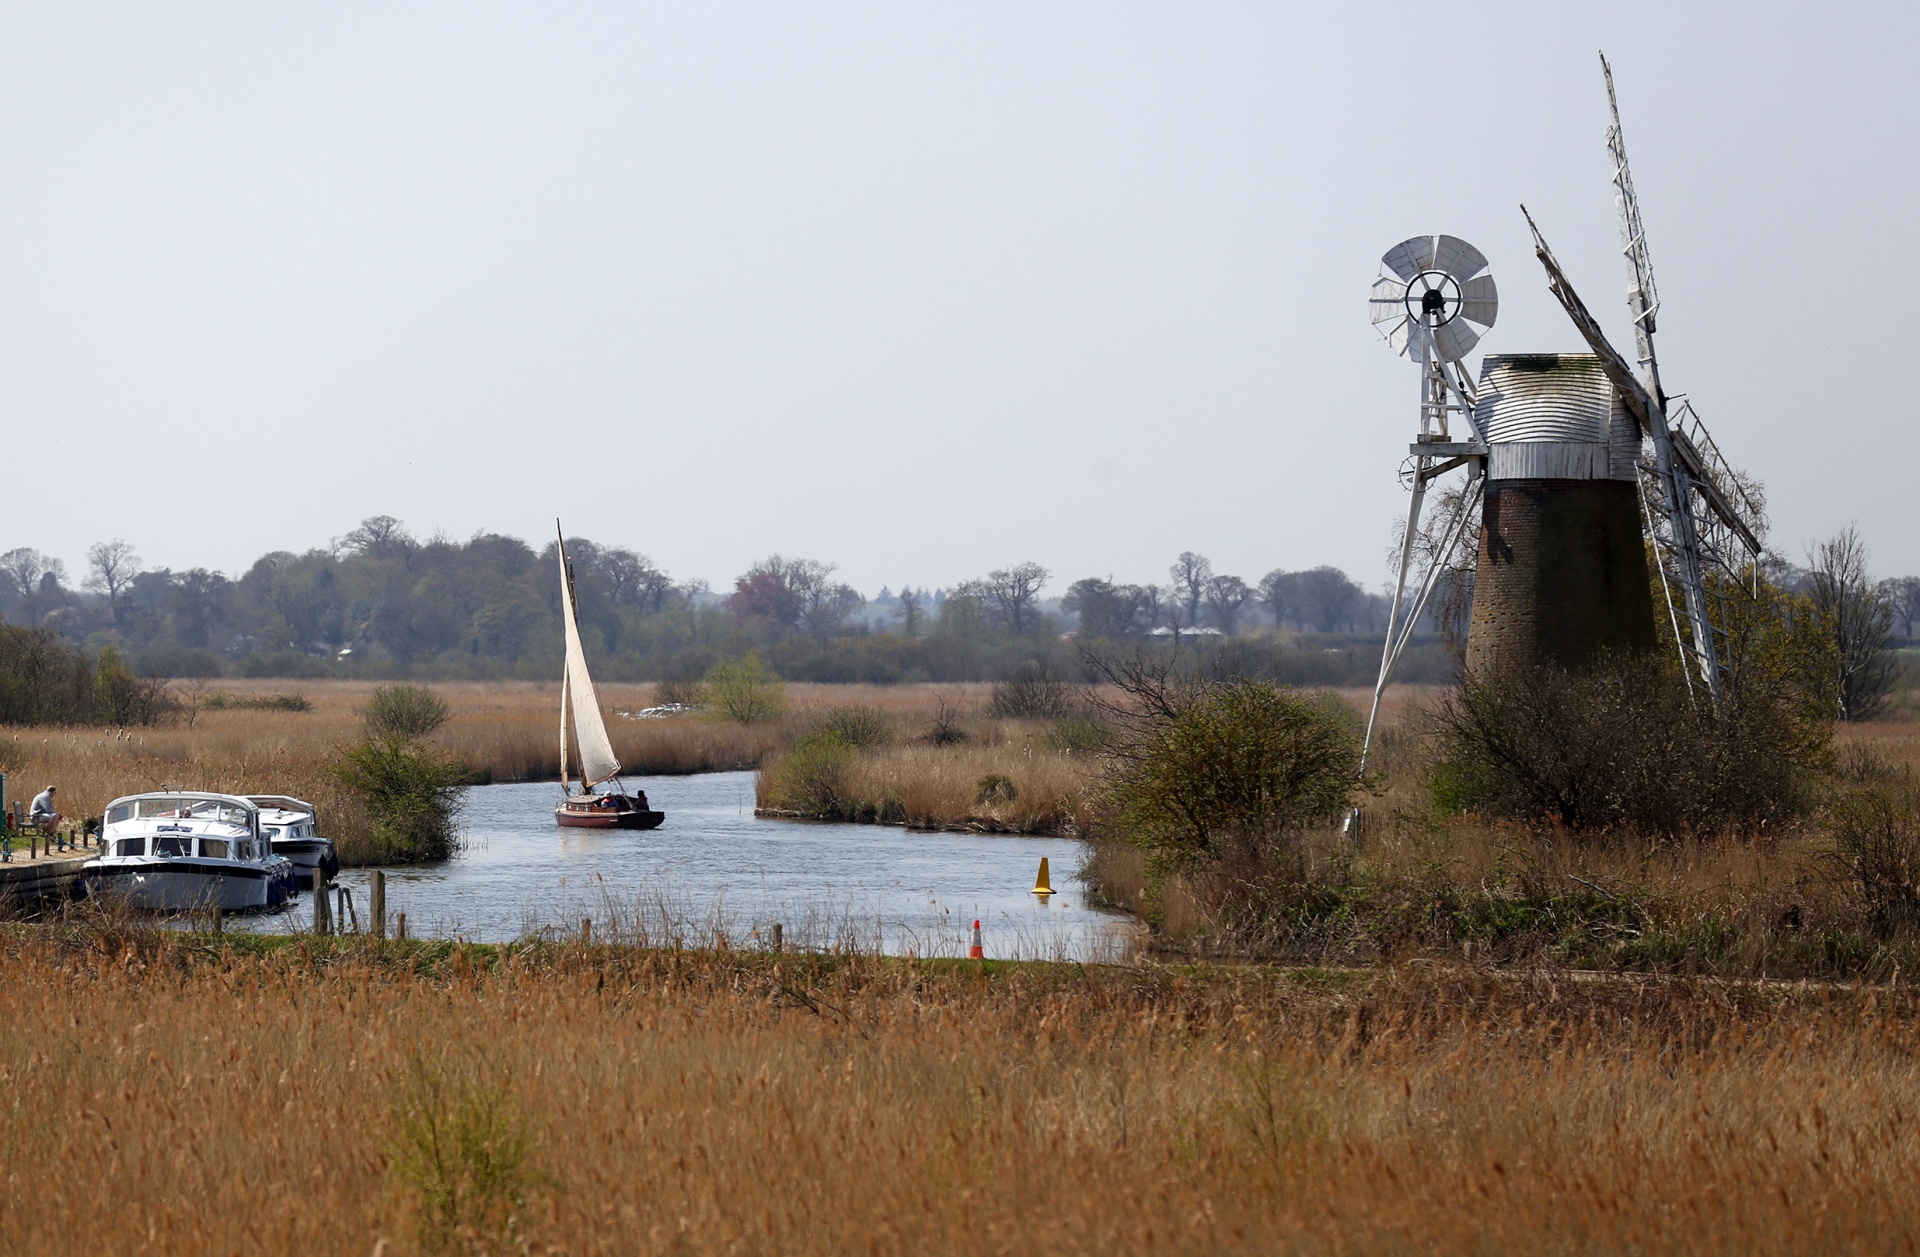 A wherry on the Norfolk Broads